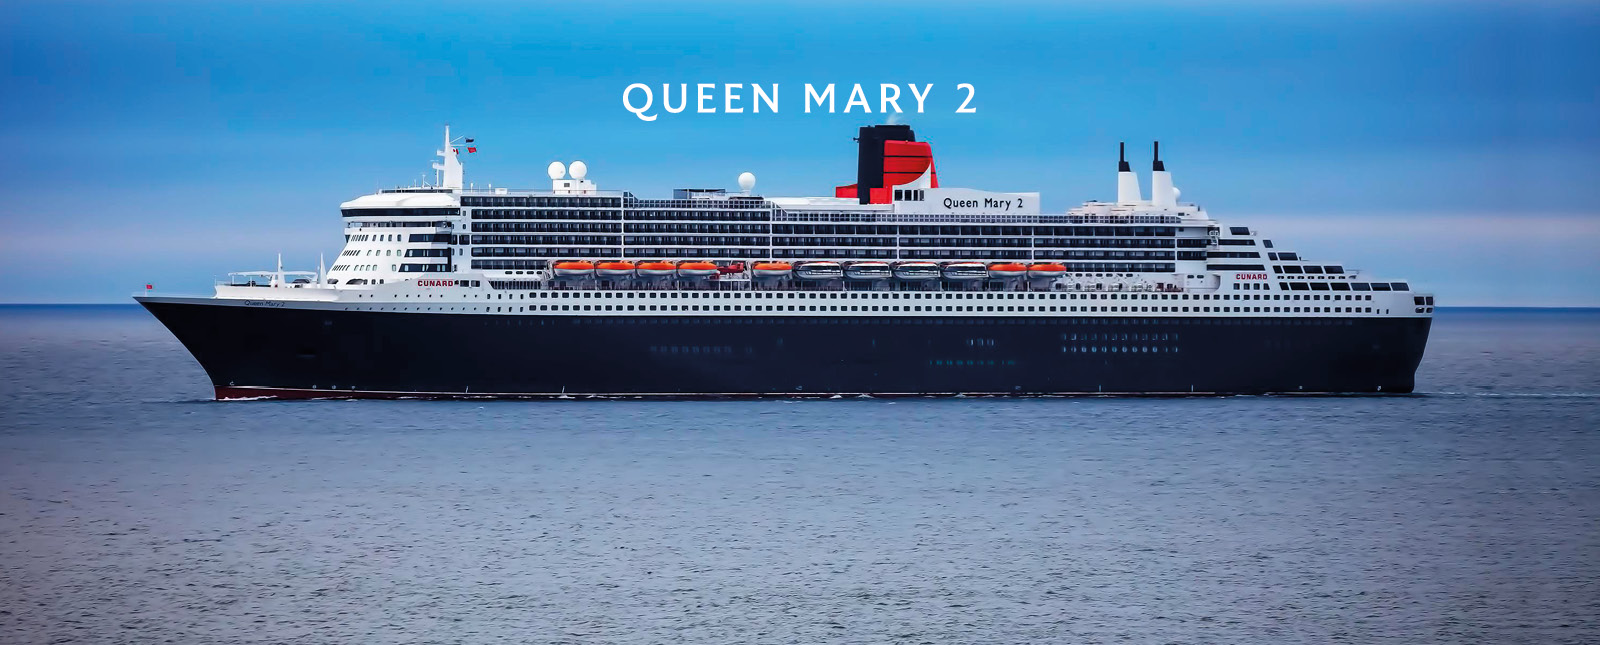 world tour queen mary 2